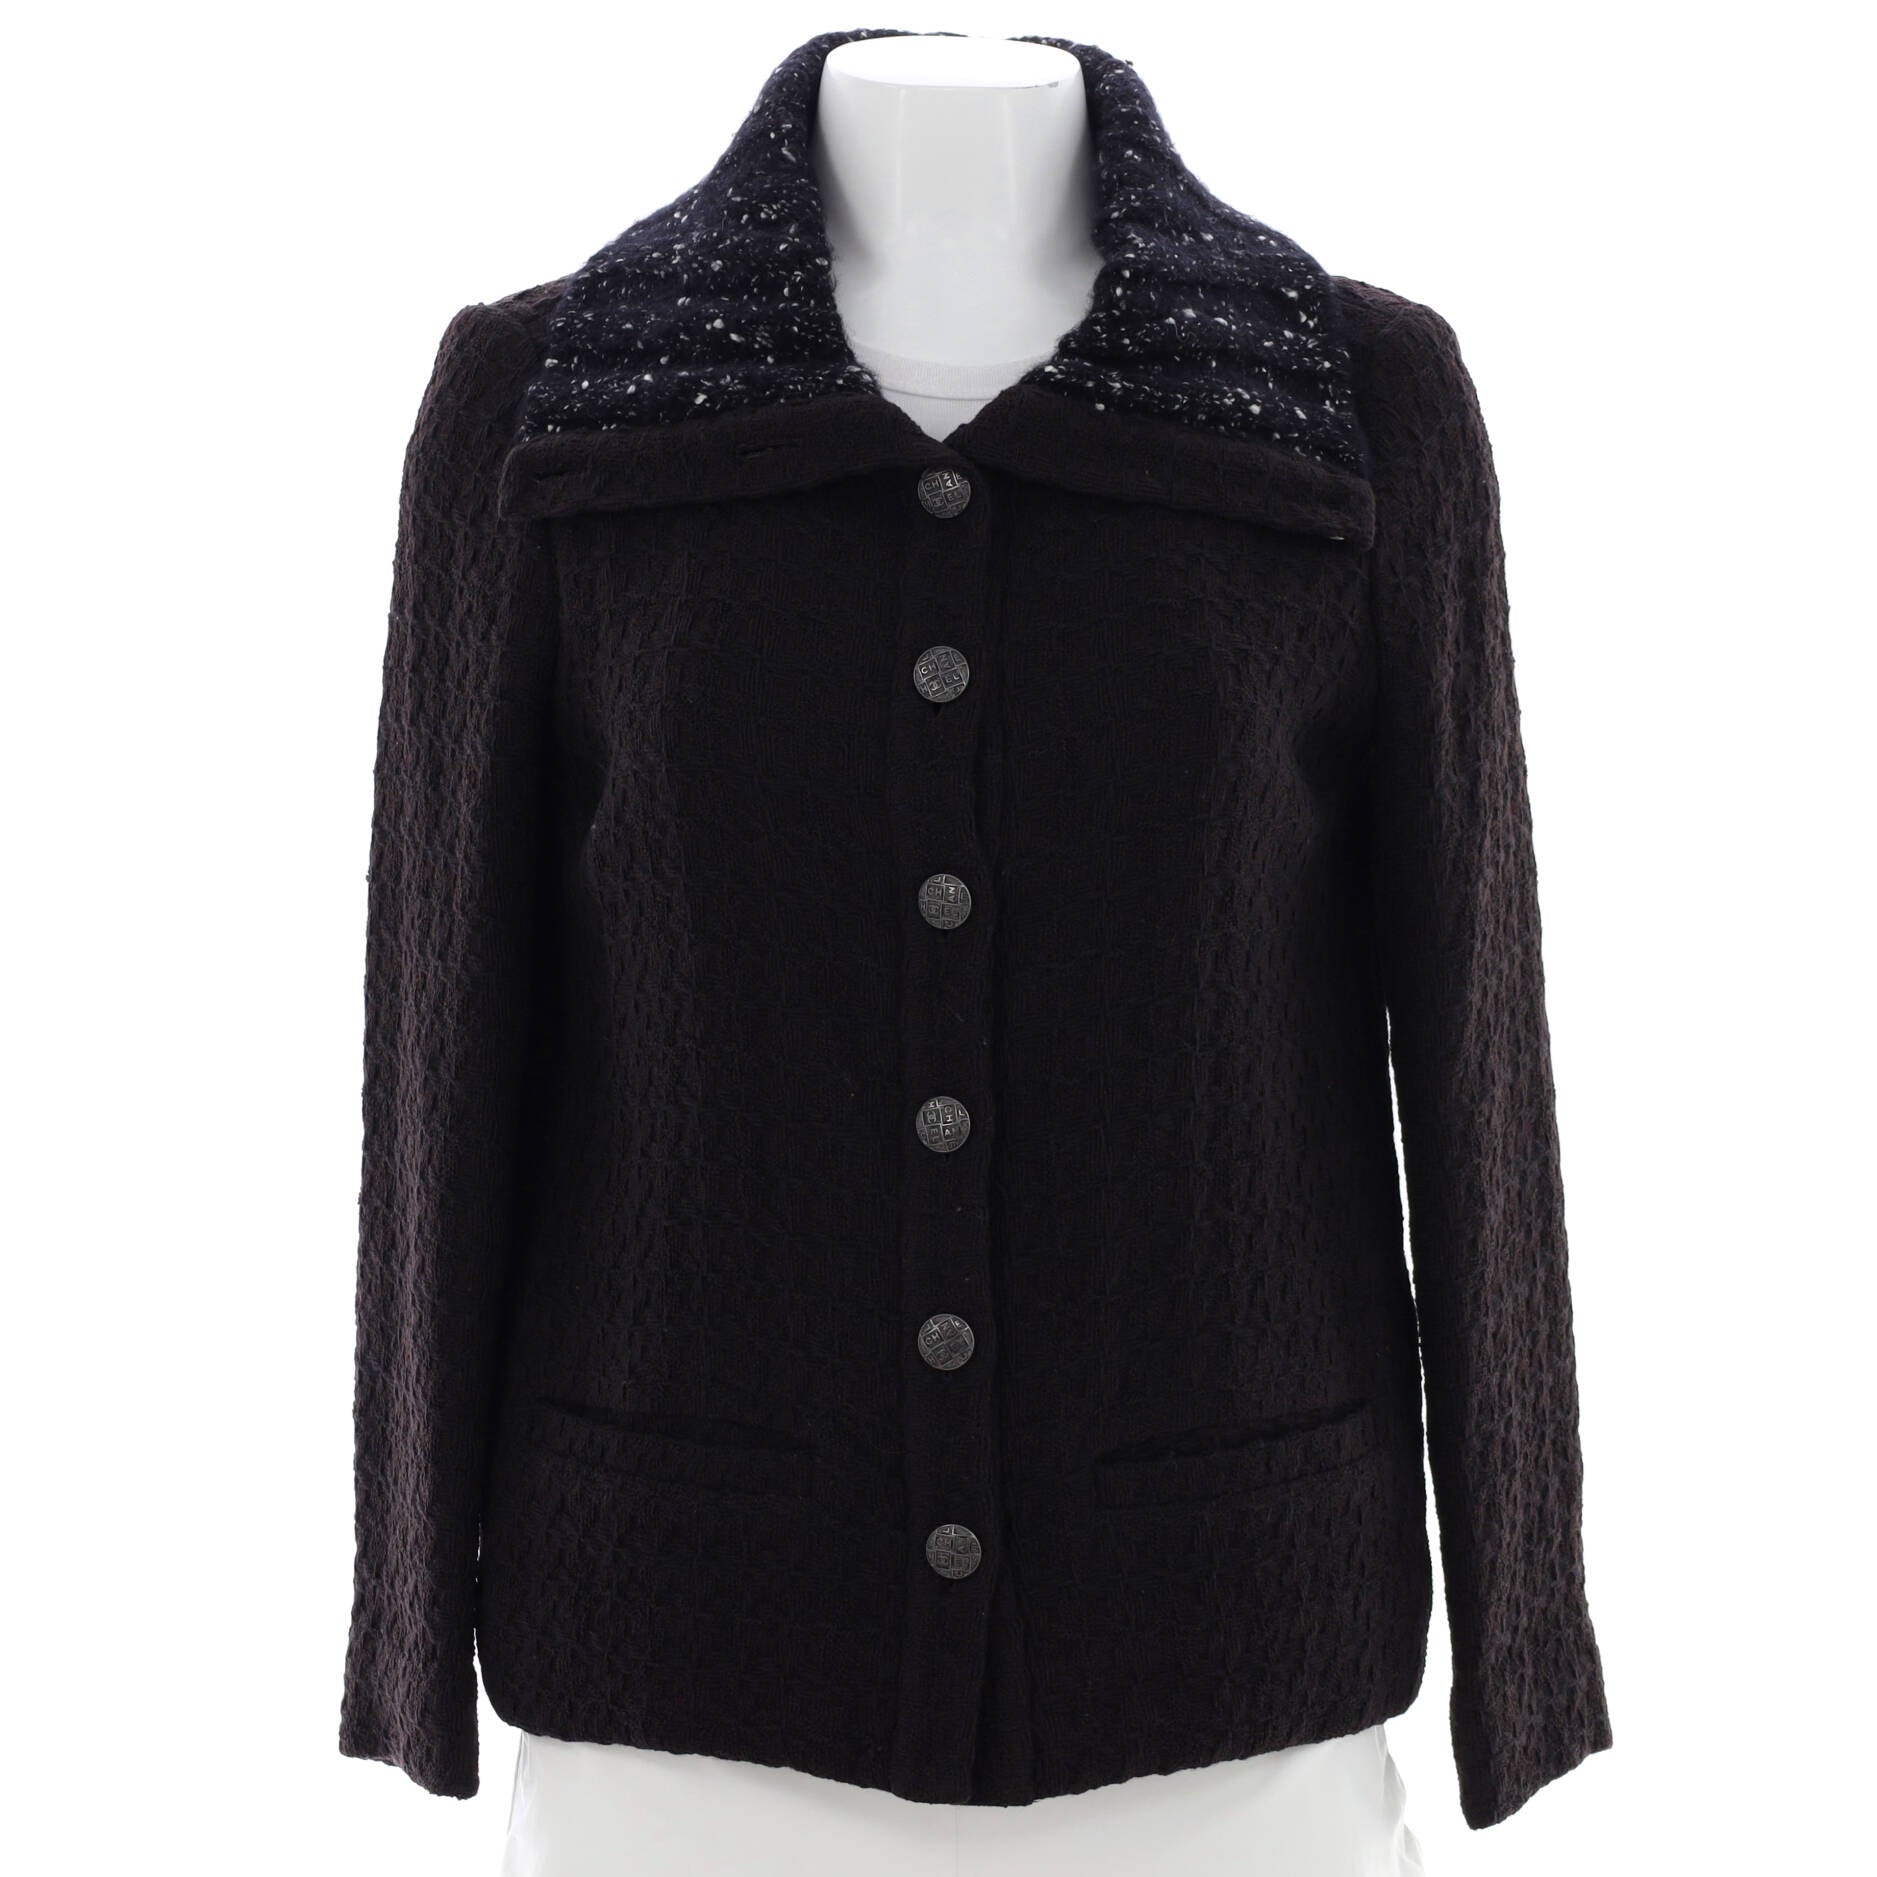 Chanel Black Cotton & Lace Button Front Collarless Jacket S Chanel | The  Luxury Closet